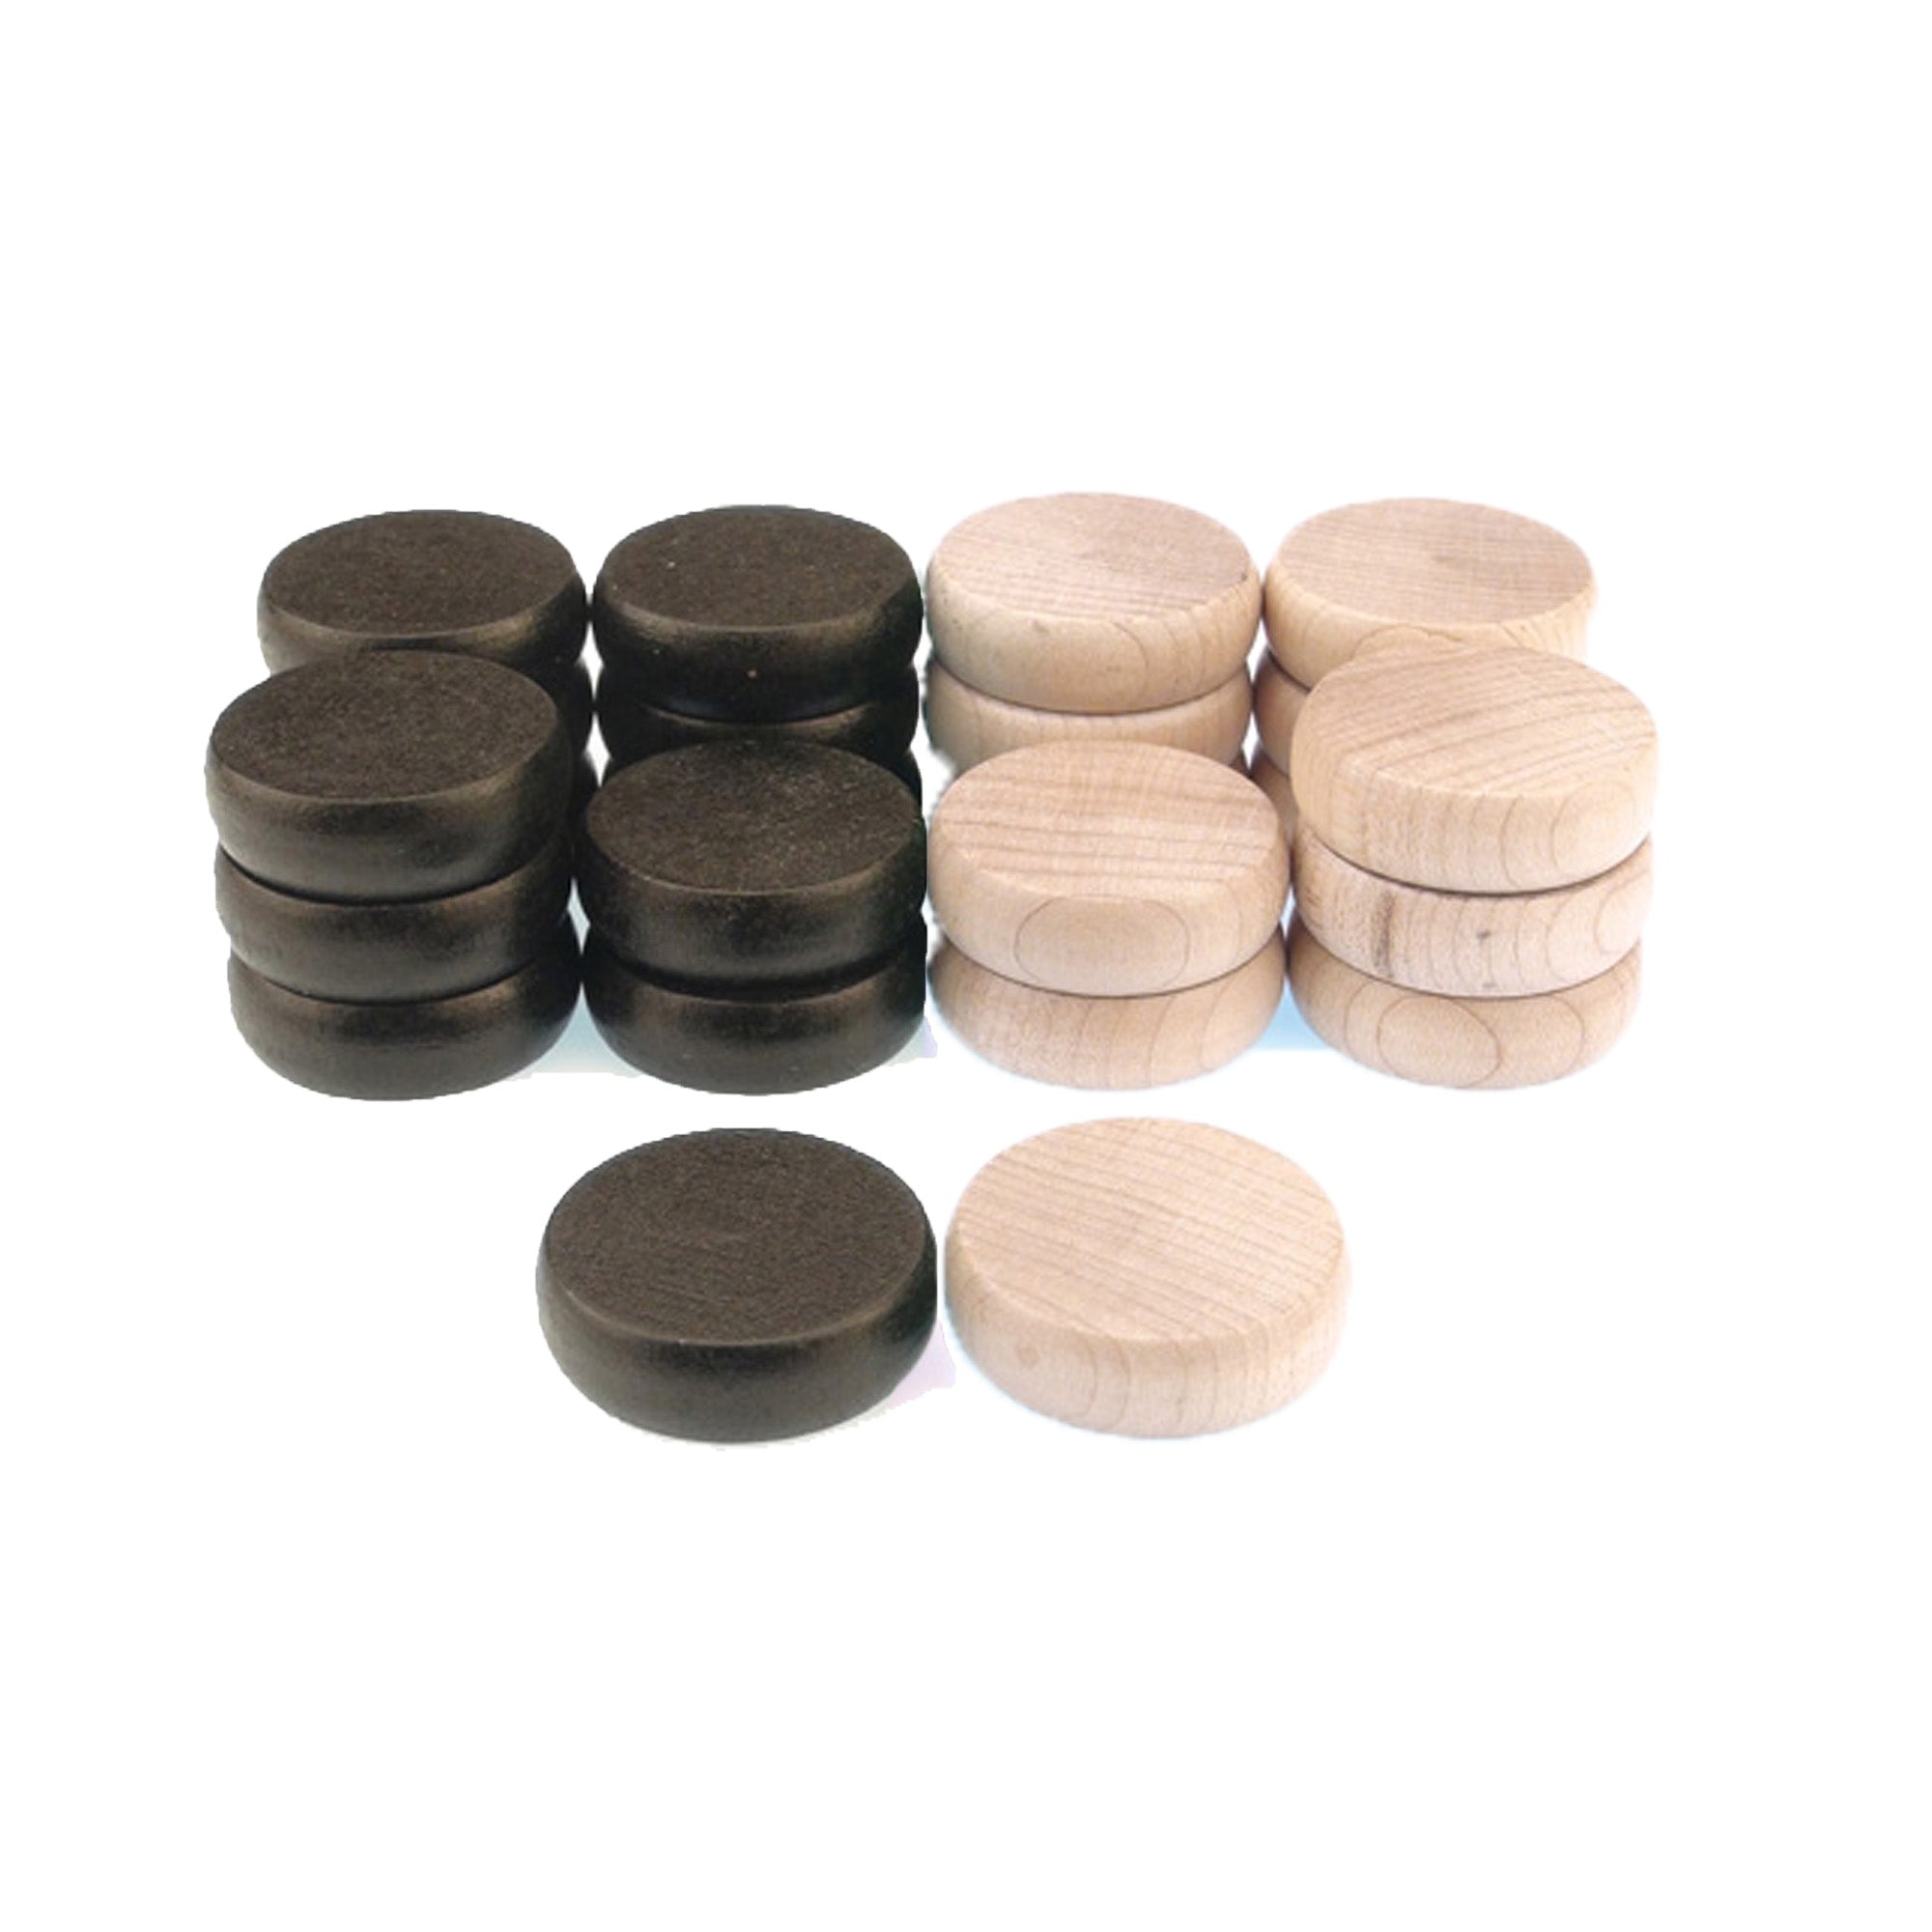 Crokinole Tournament Discs - 13 Black and 13 Wooden - Size 1-1/4" - 24 Needed + 2 Spare Discs - Bag Included - Carrom Alternative